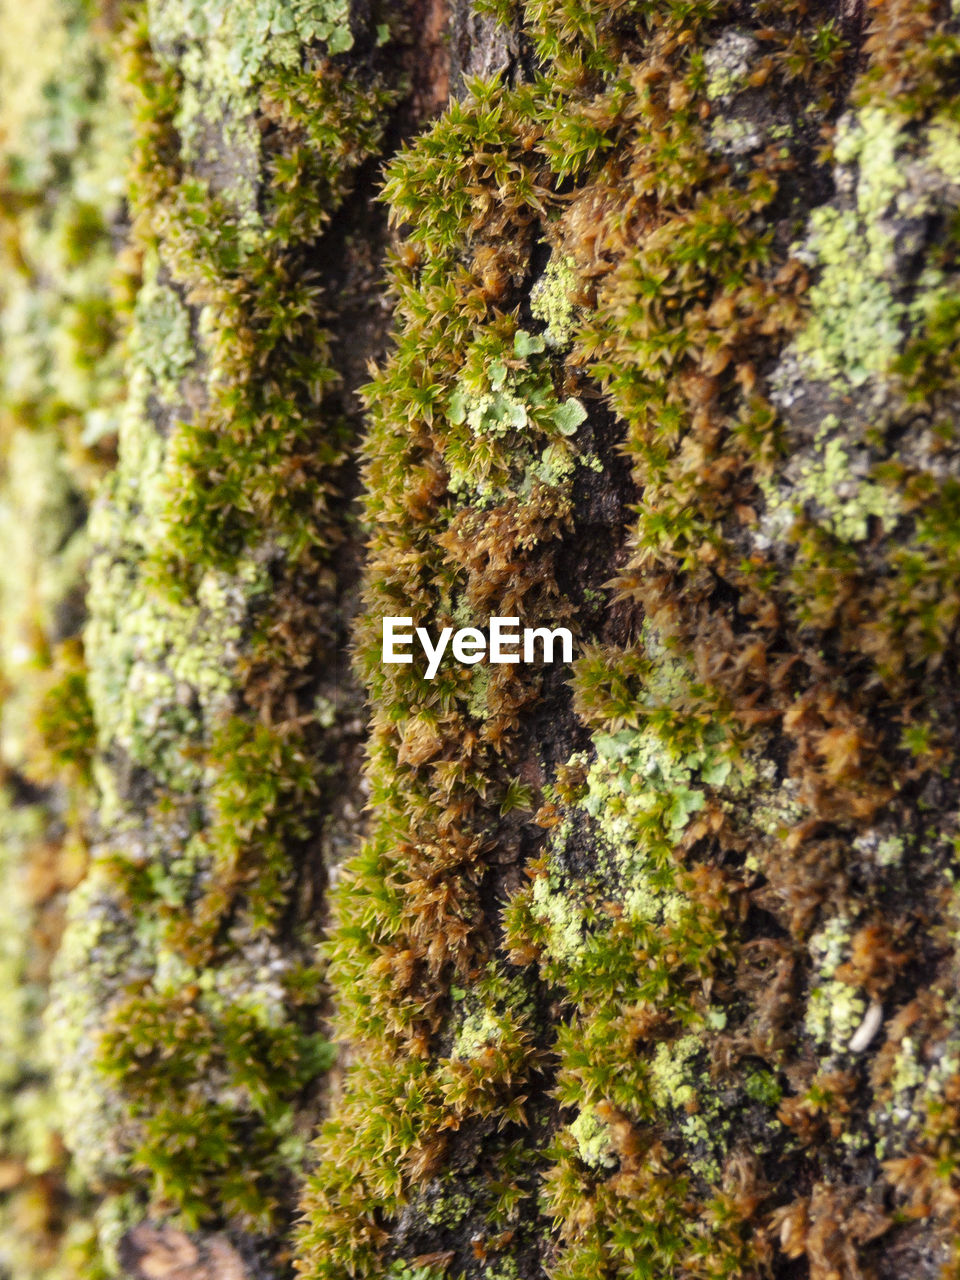 CLOSE-UP OF LICHEN ON TREE TRUNK